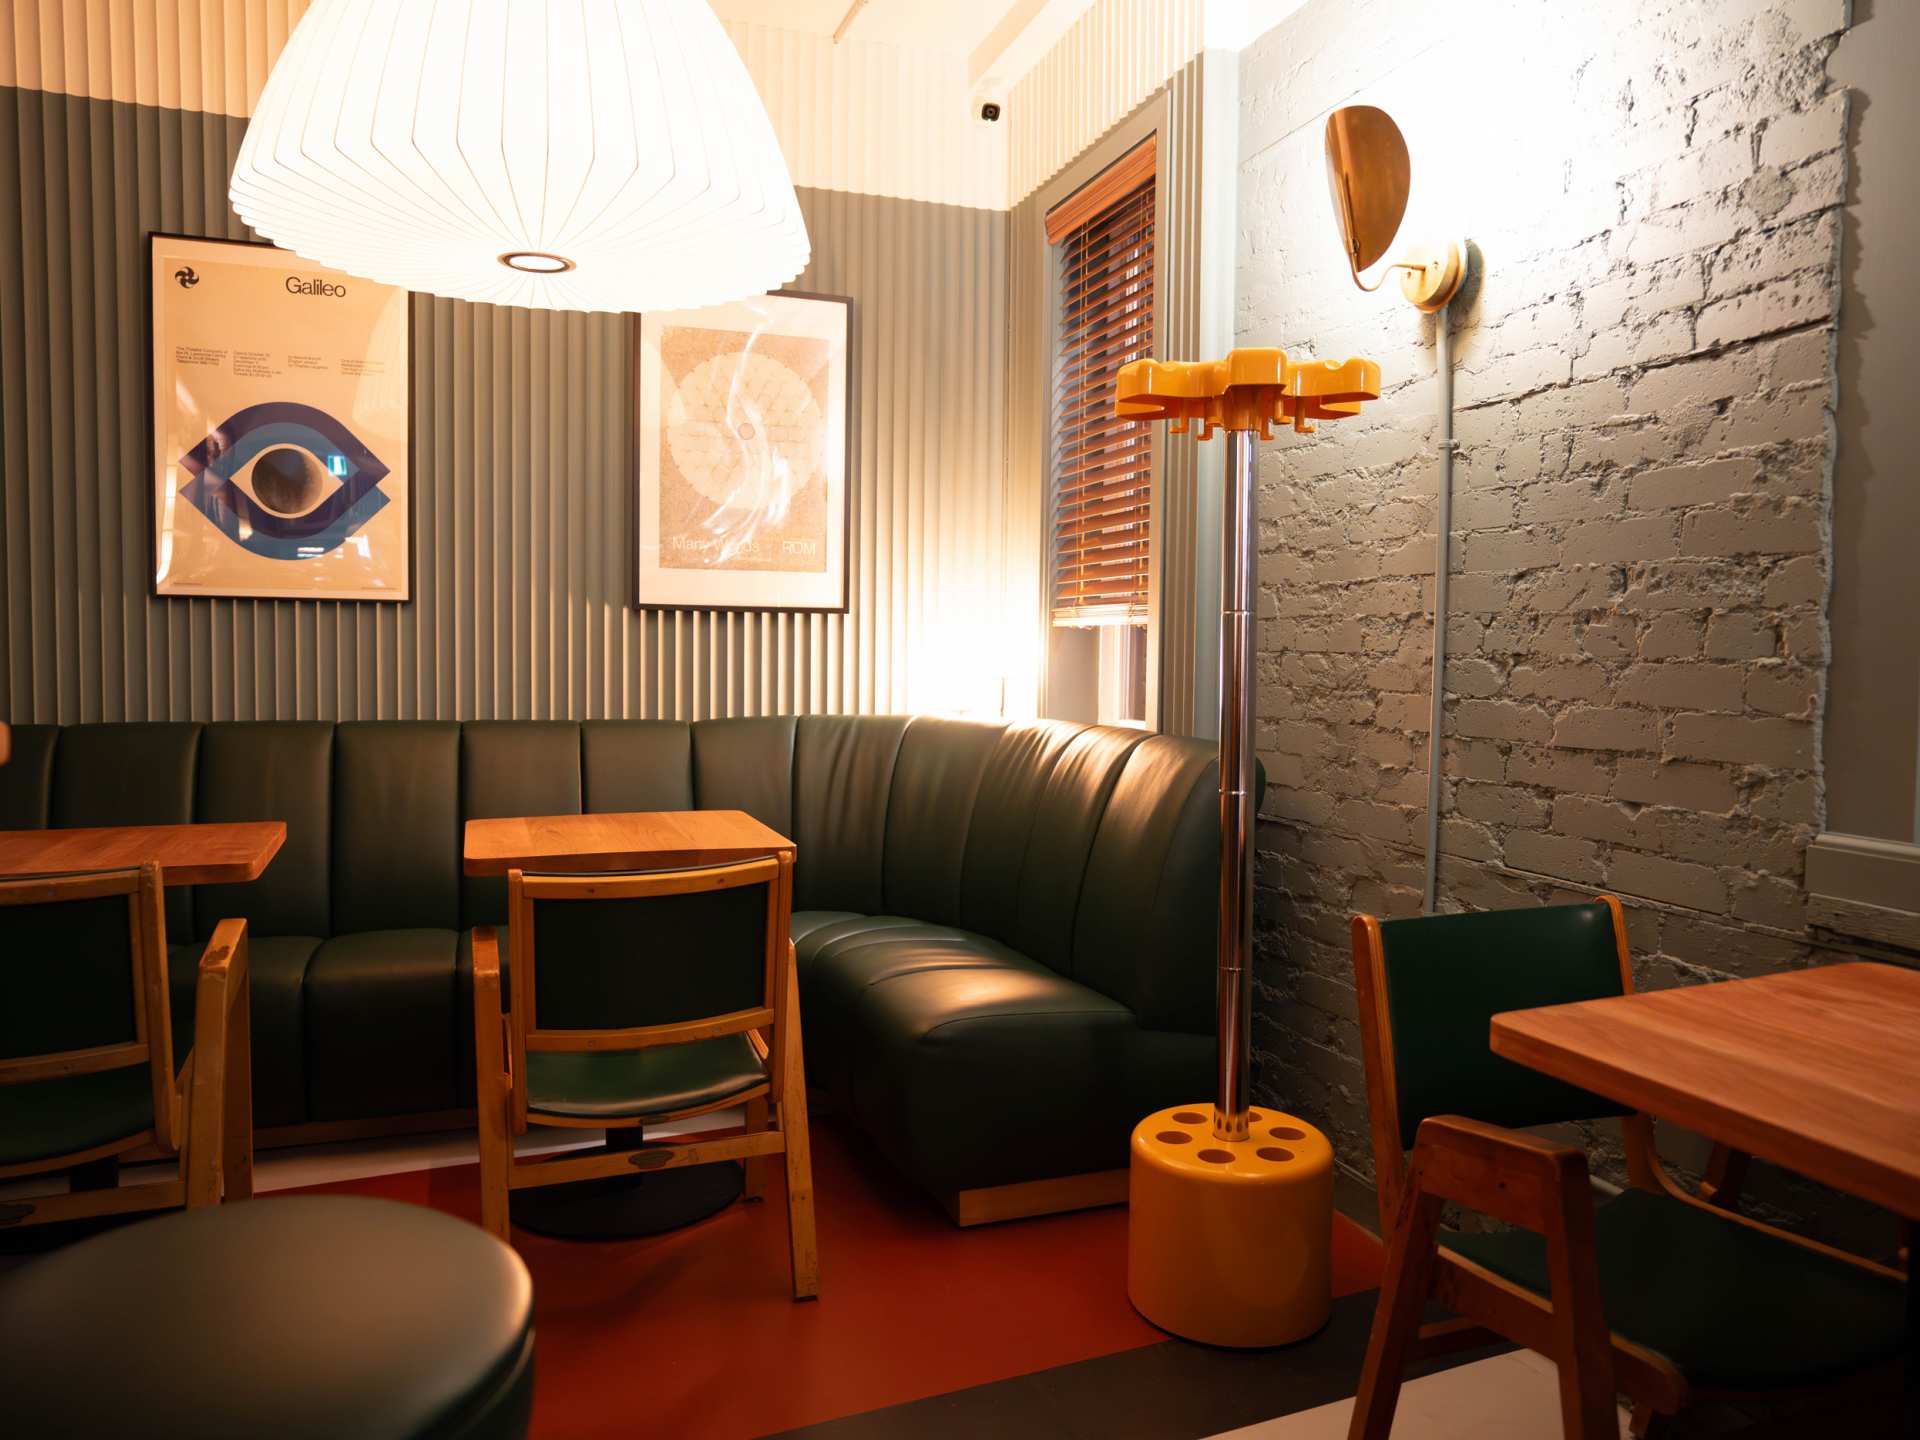 Doc’s Green Door Lounge | Doc’s Green Door Lounge is full of fun furniture and cozy nooks